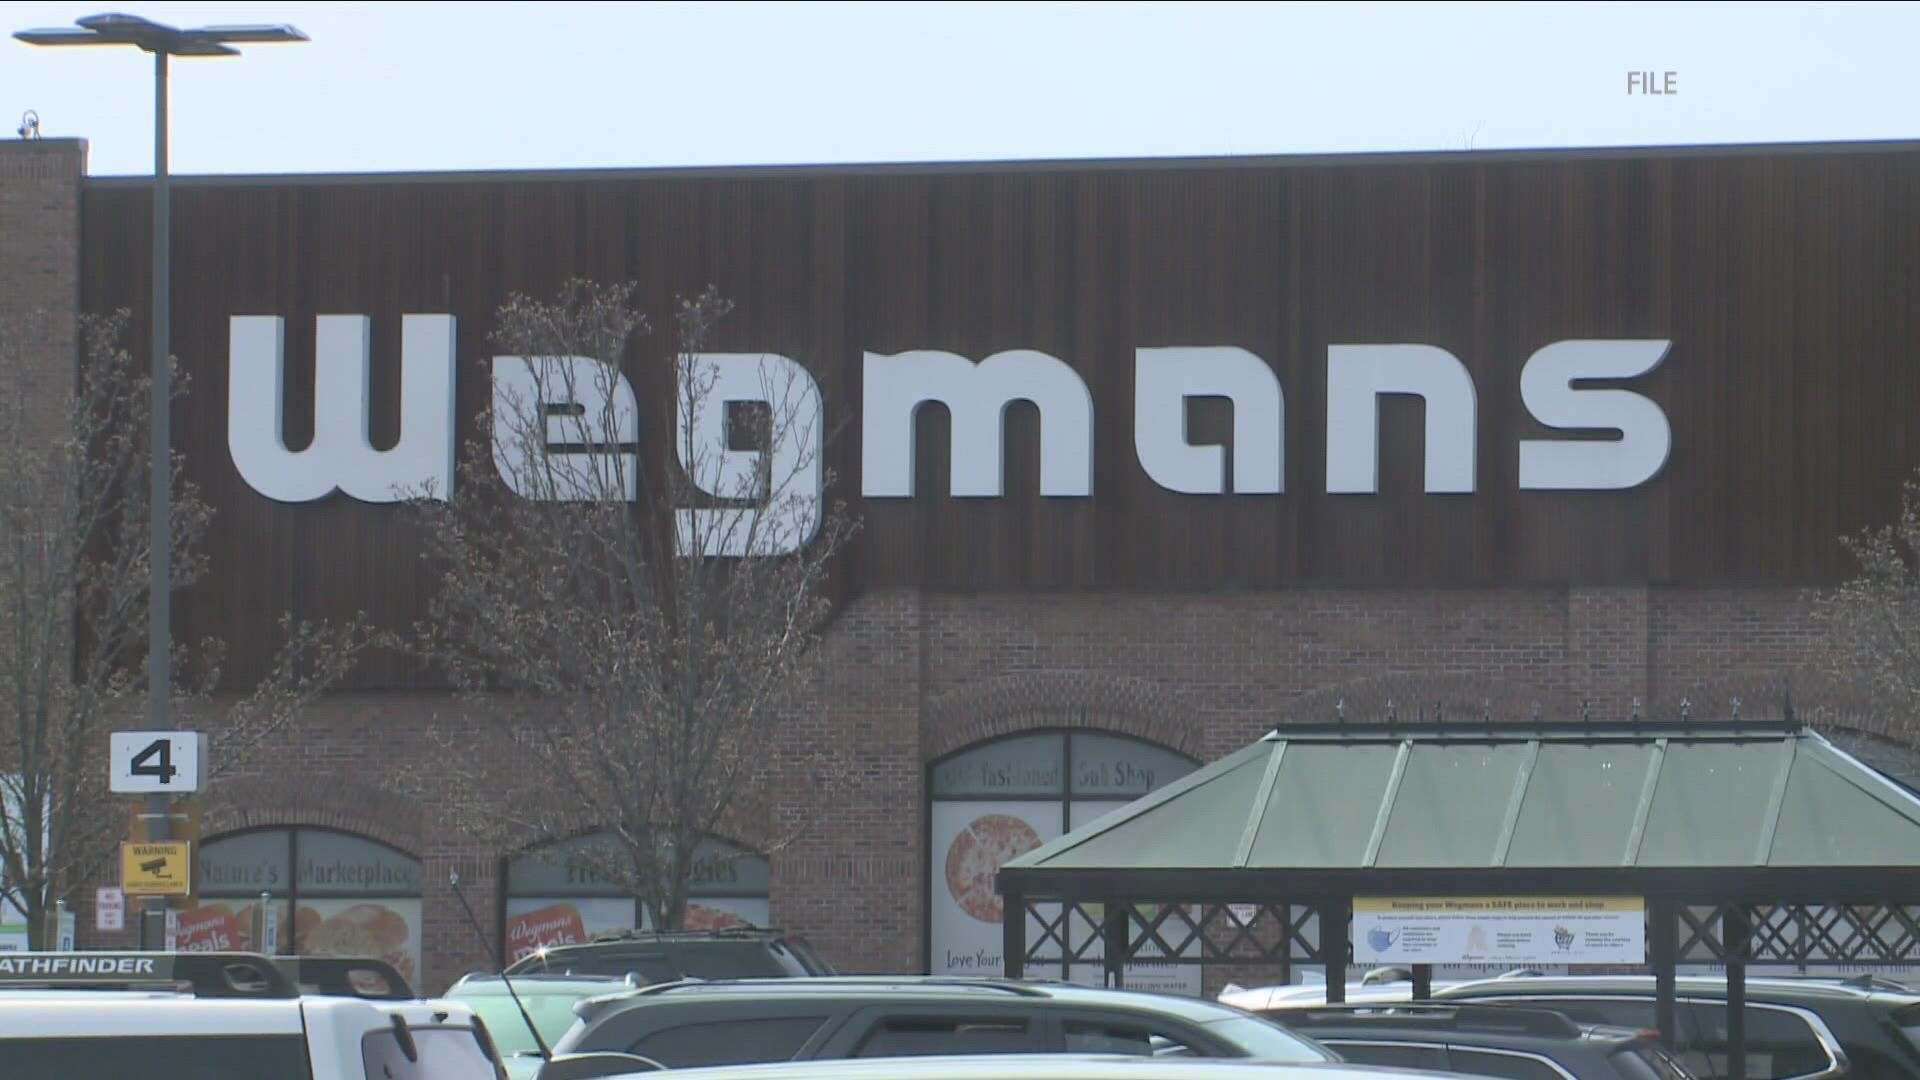 If you shop at Wegmans and use their SCAN app, you won't be able to shop that way for much longer.